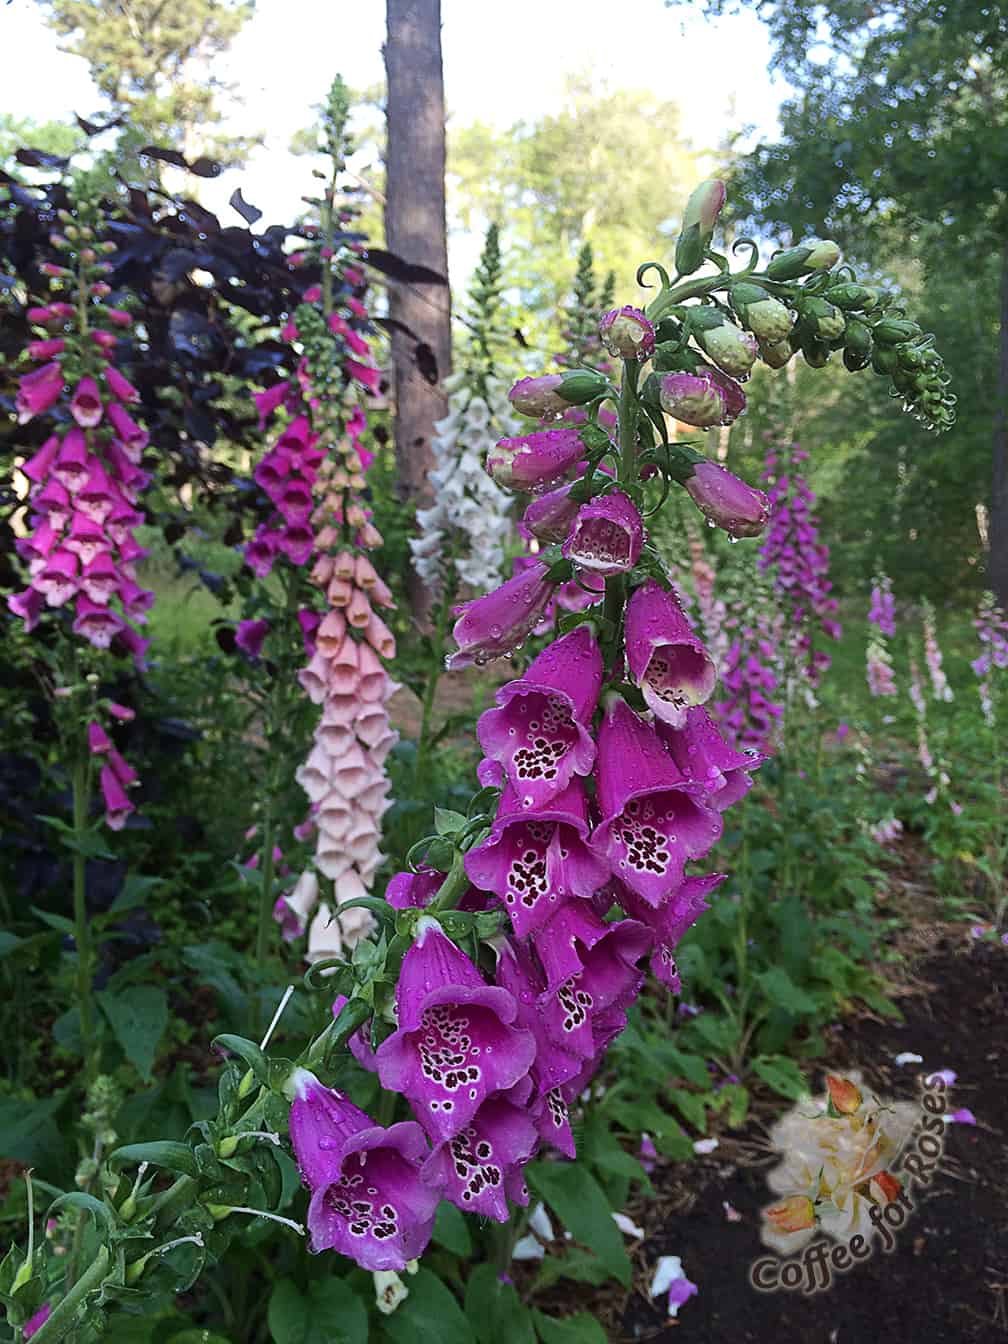 Now on to more pleasant June sights. Foxglove. Love them. 